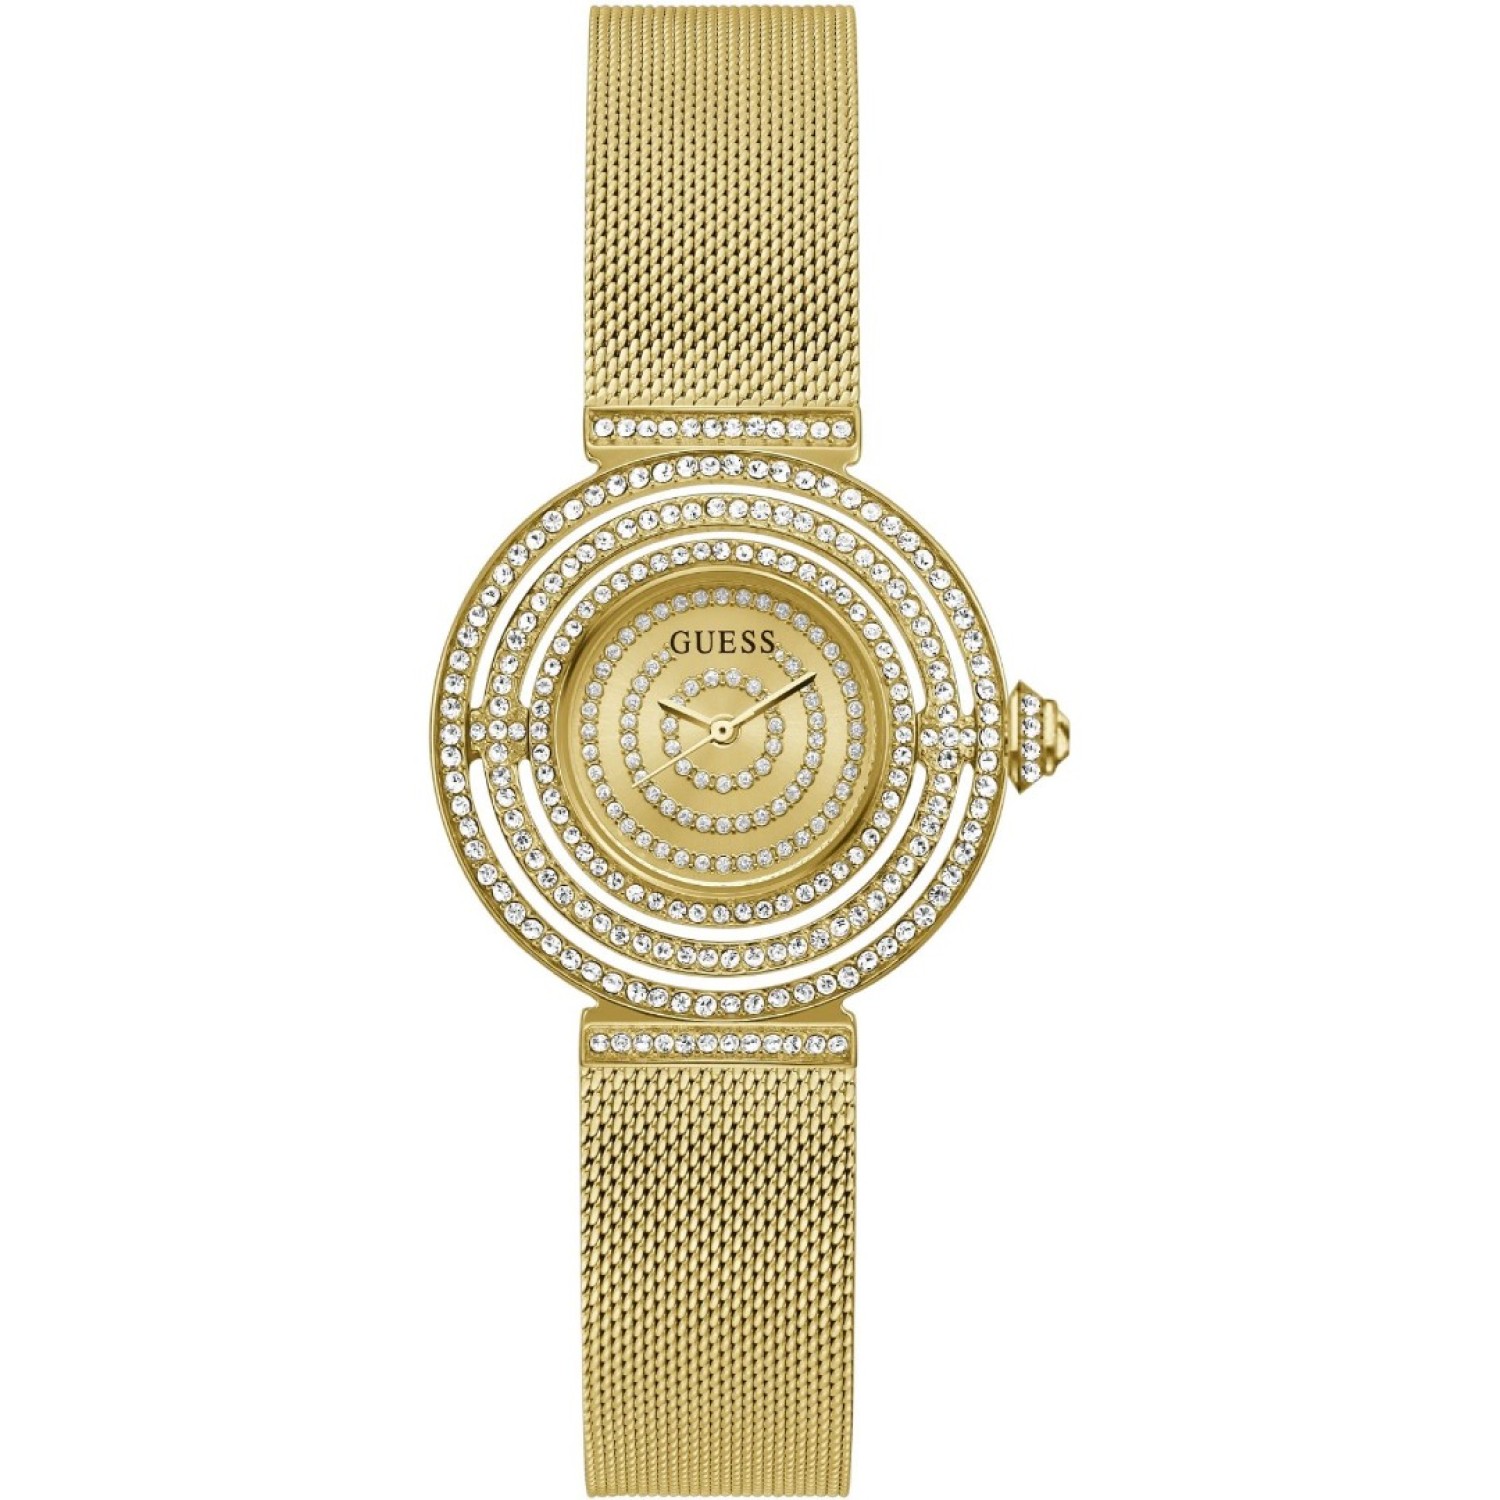 GW0550L2  Guess Dream Gold -Tone Mesh Womans Watch.   Afterpay - Split your purchase into 4 instalments - Pay for your purchase over 4 instalments, due every two weeks.